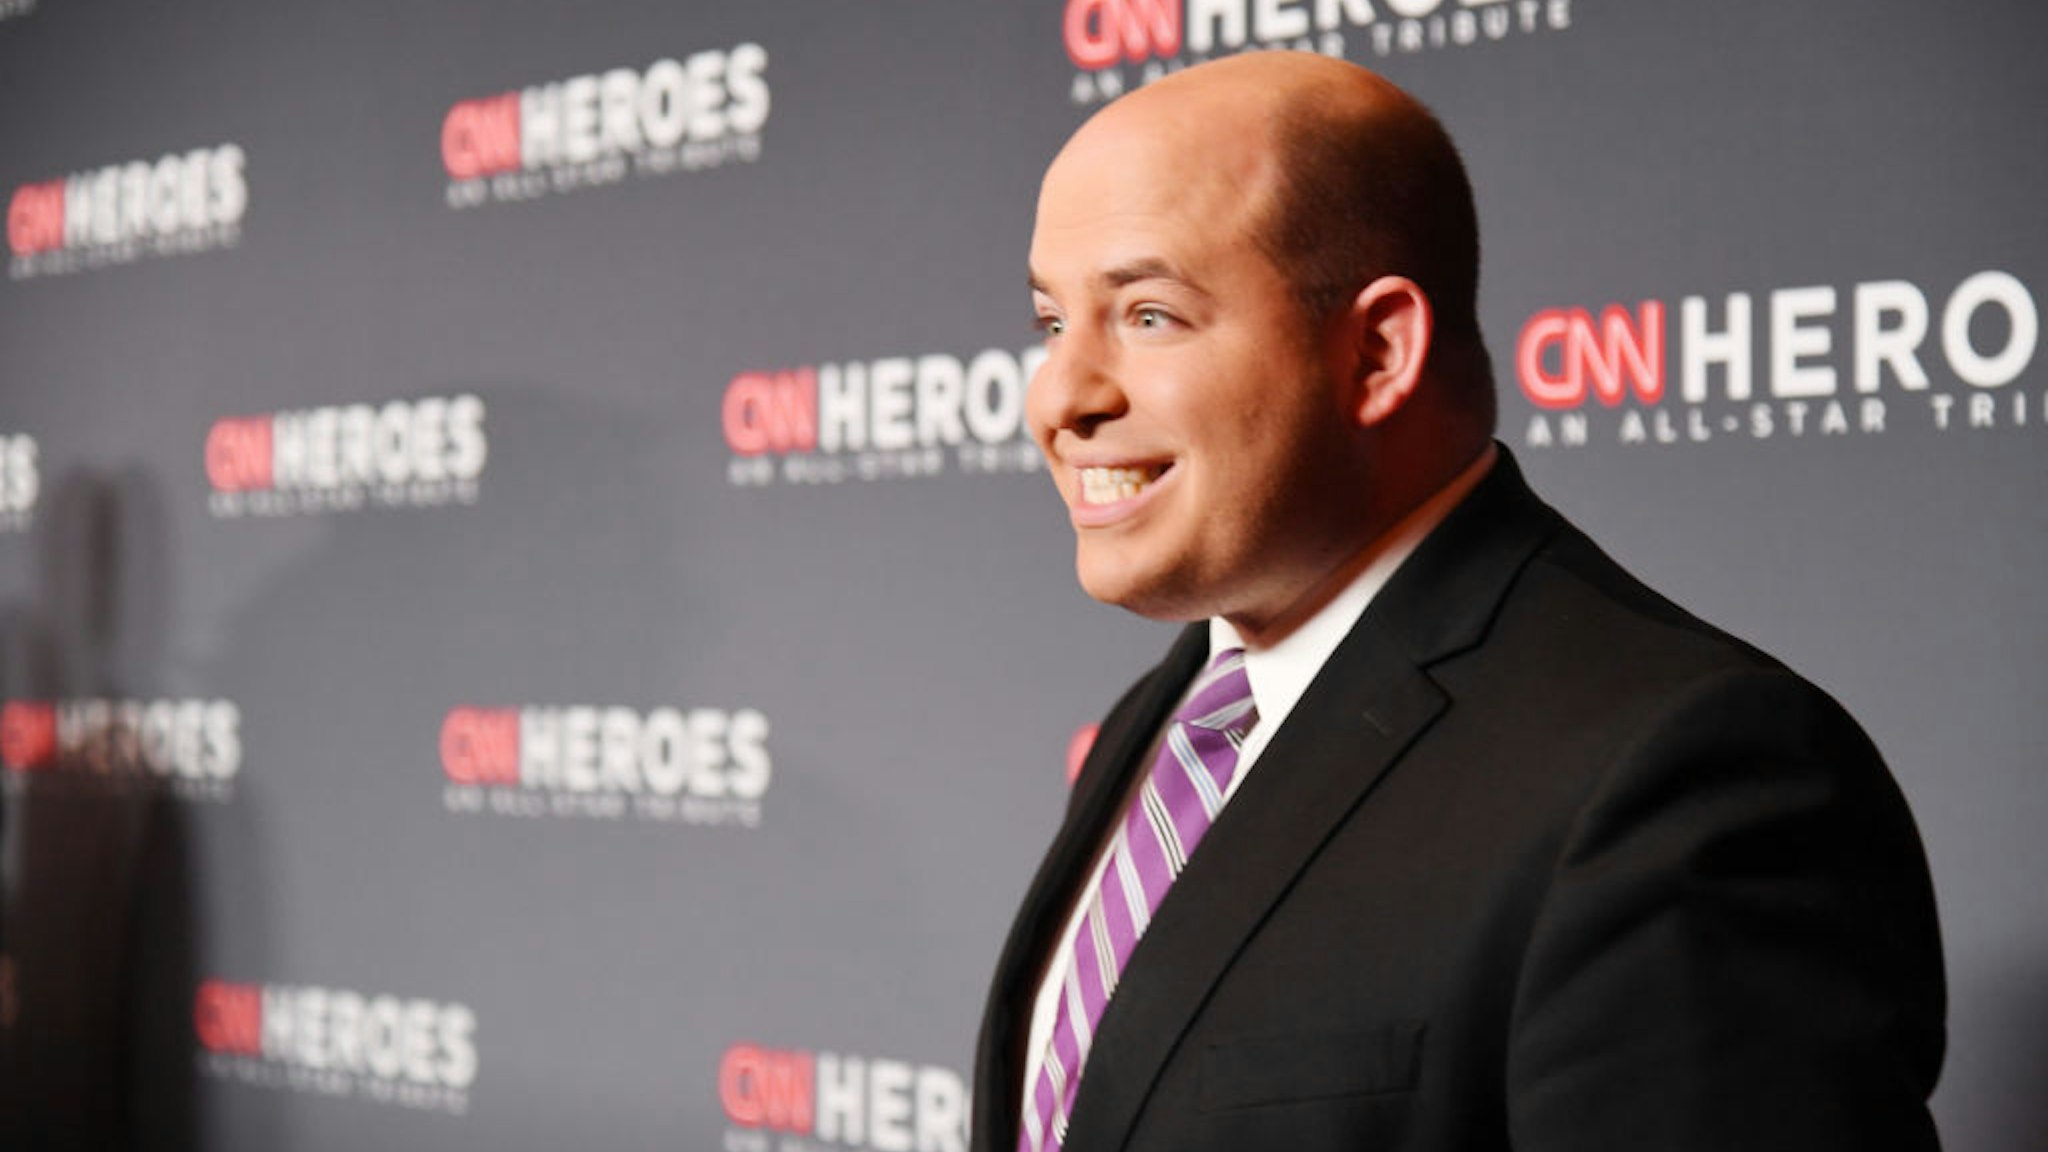 Brian Stelter attends the 12th Annual CNN Heroes: An All-Star Tribute at American Museum of Natural History on December 9, 2018 in New York City.